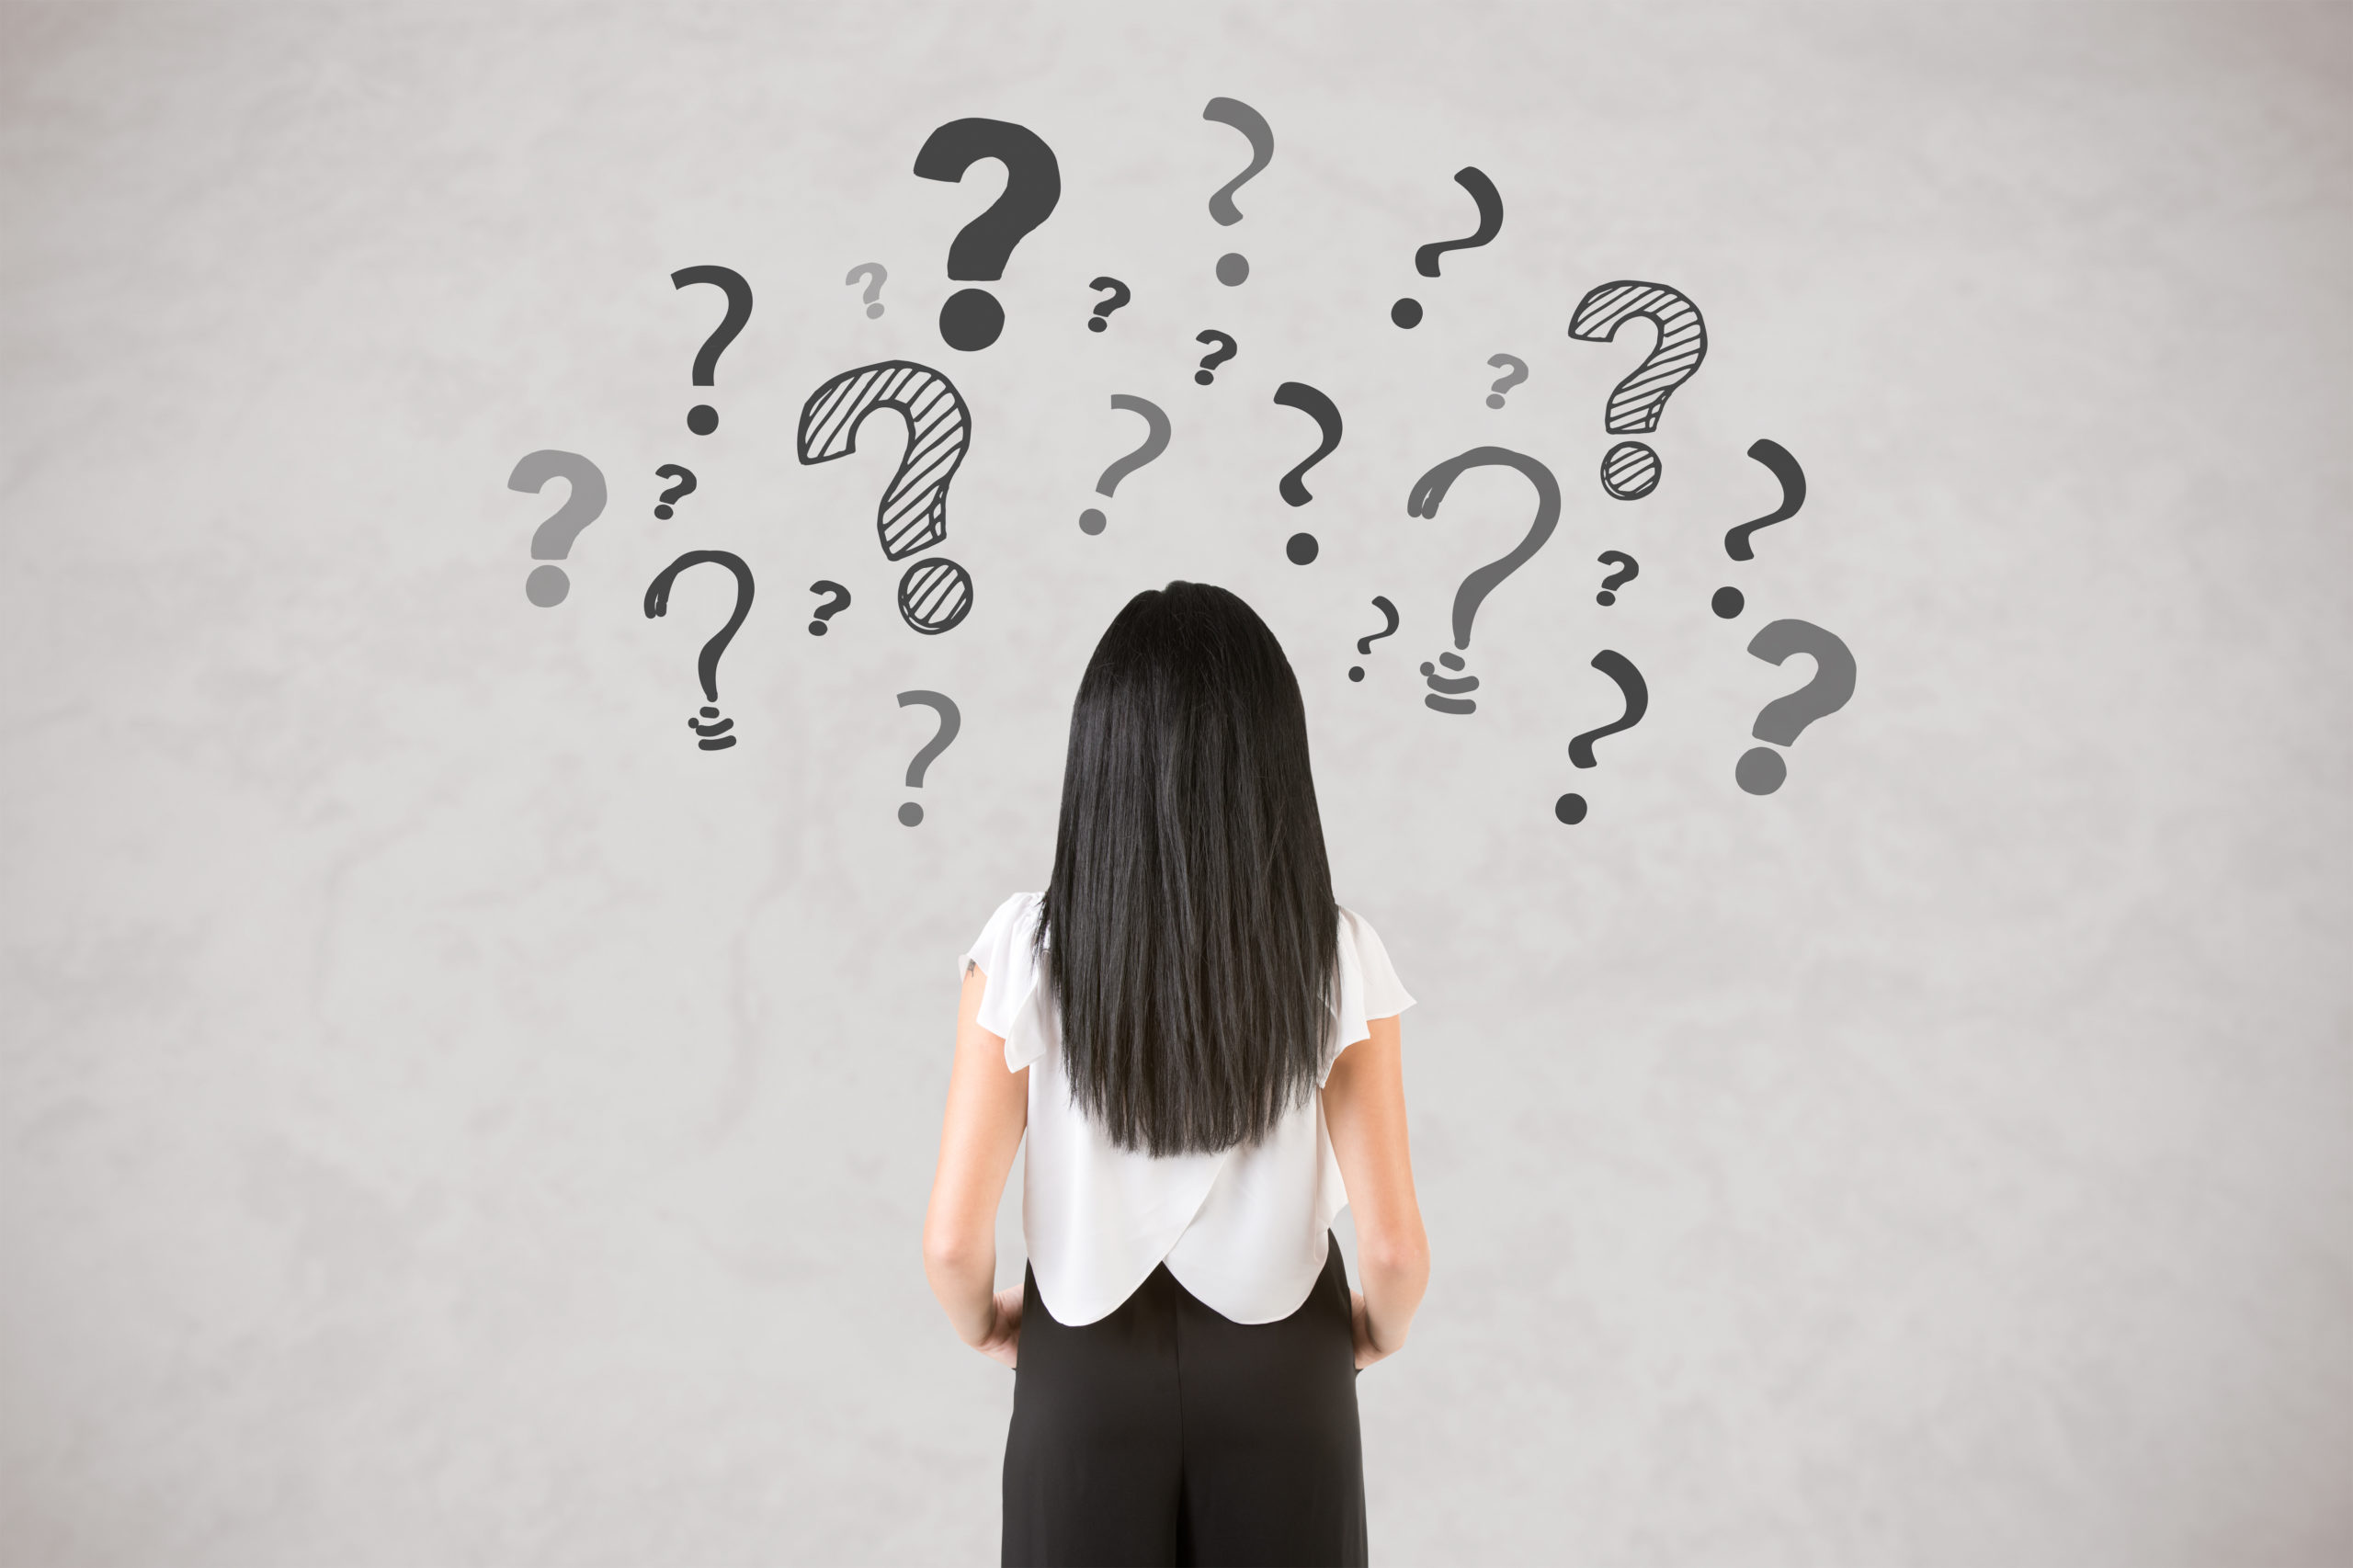 Guide for Landlords: What Questions Should I Ask a Guarantor?